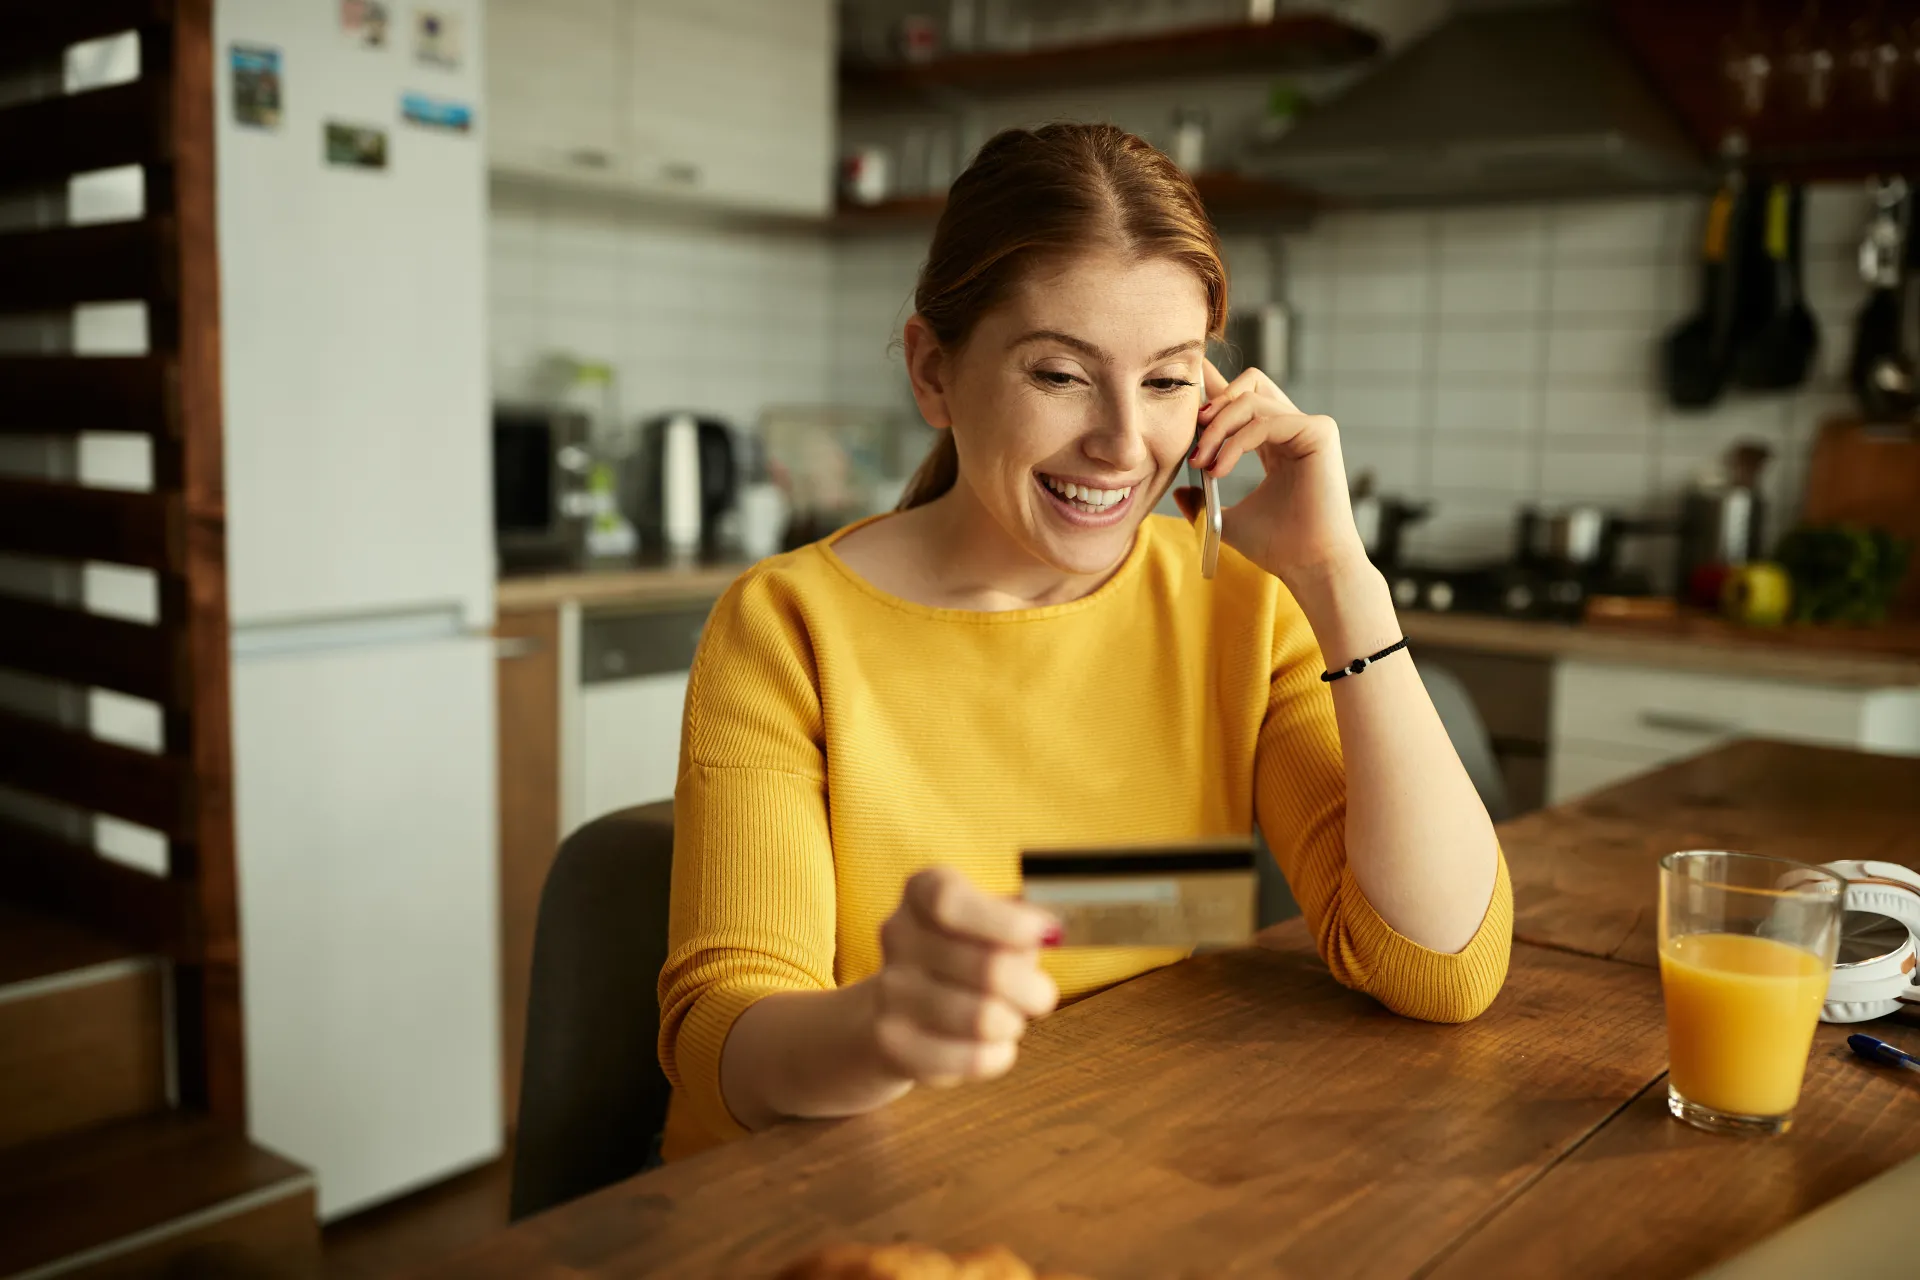 Woman giving card details over phone